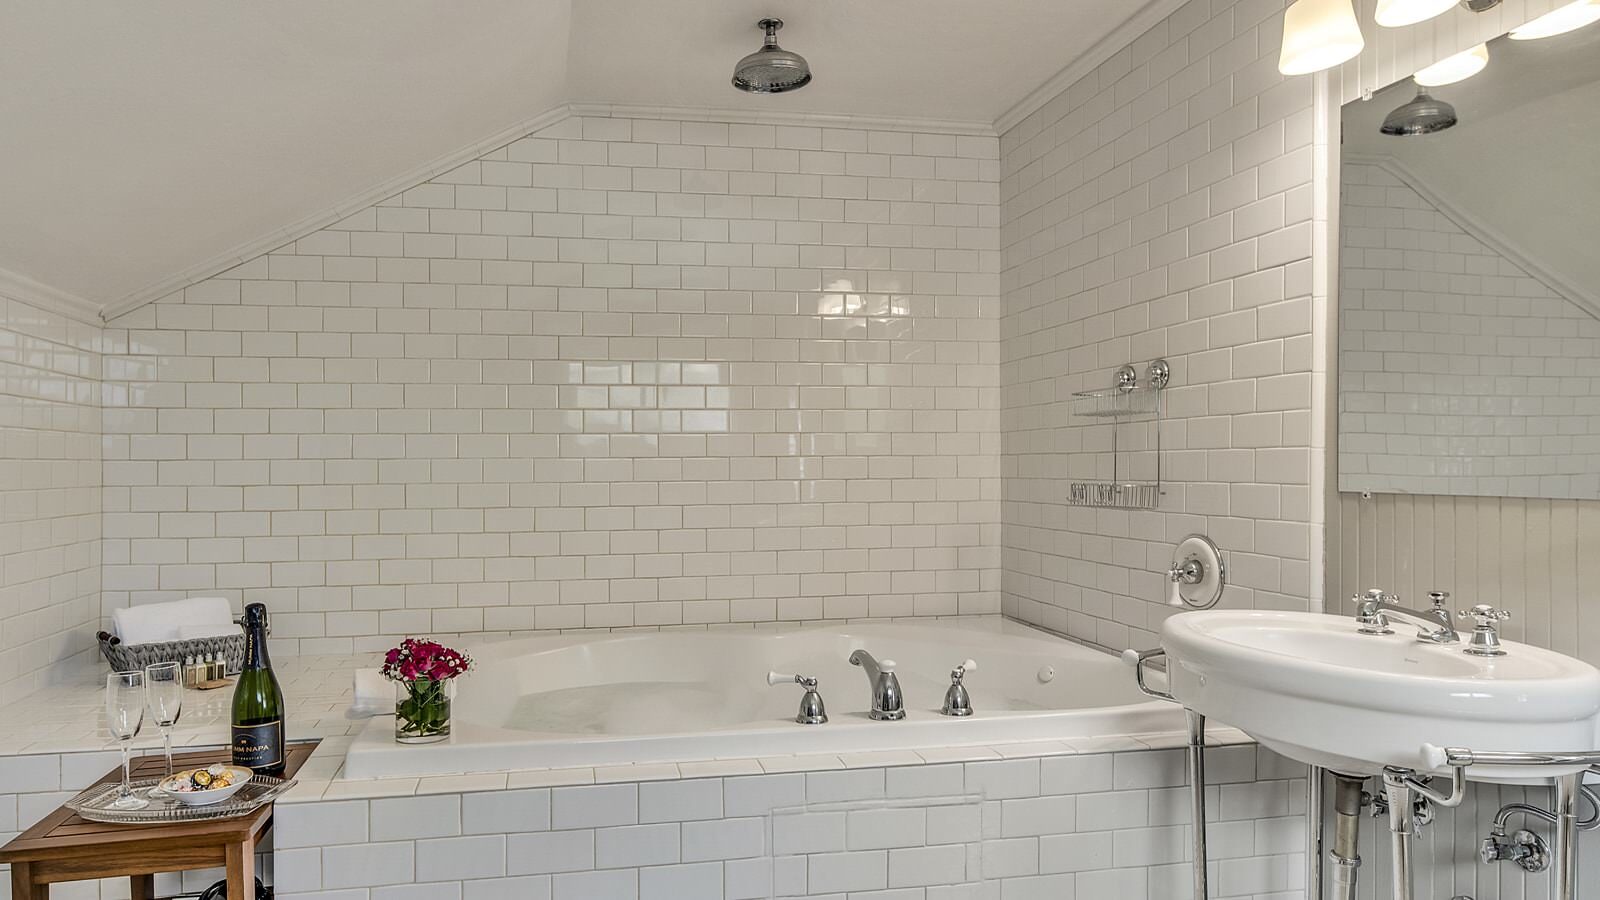 Bathroom with soaker tub surrounded by white tile and white pedestal sink